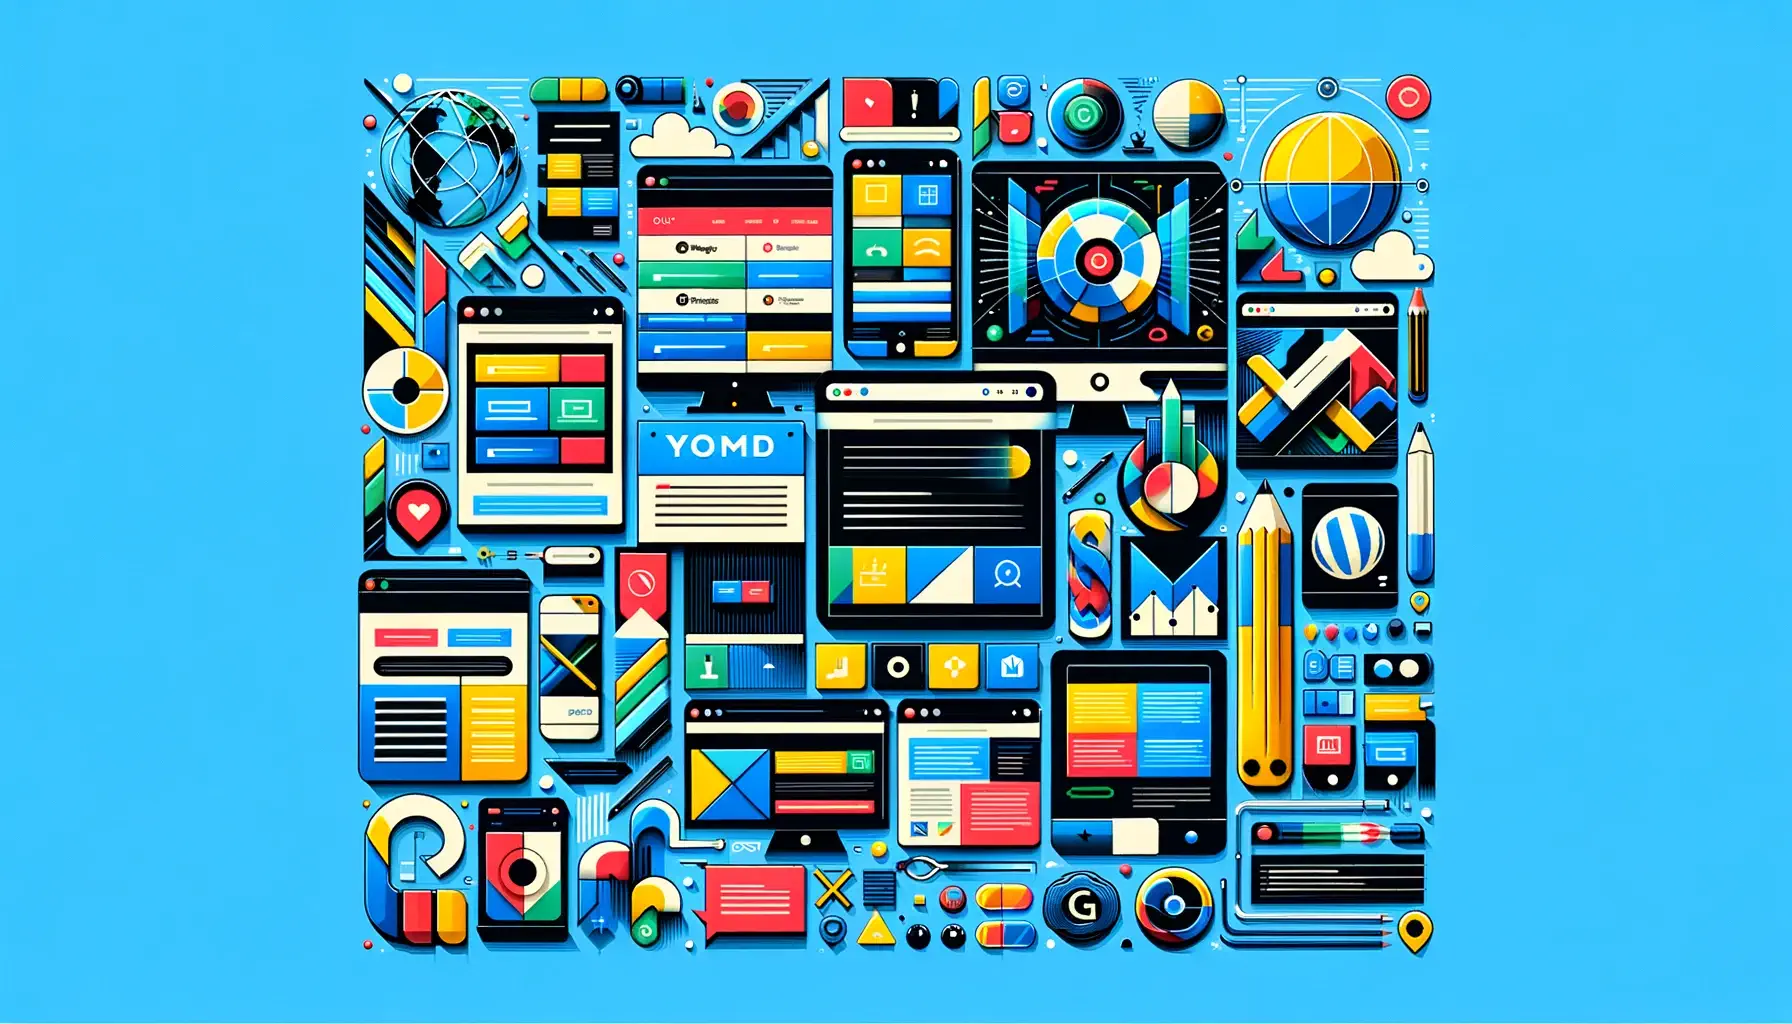 A colorful collage of various stylized website elements and icons, showcasing different WordPress themes, arranged in a pattern with Google's brand colors (blue, red, yellow, green). The overall design is vibrant and denotes a diverse range of modern and responsive web designs.